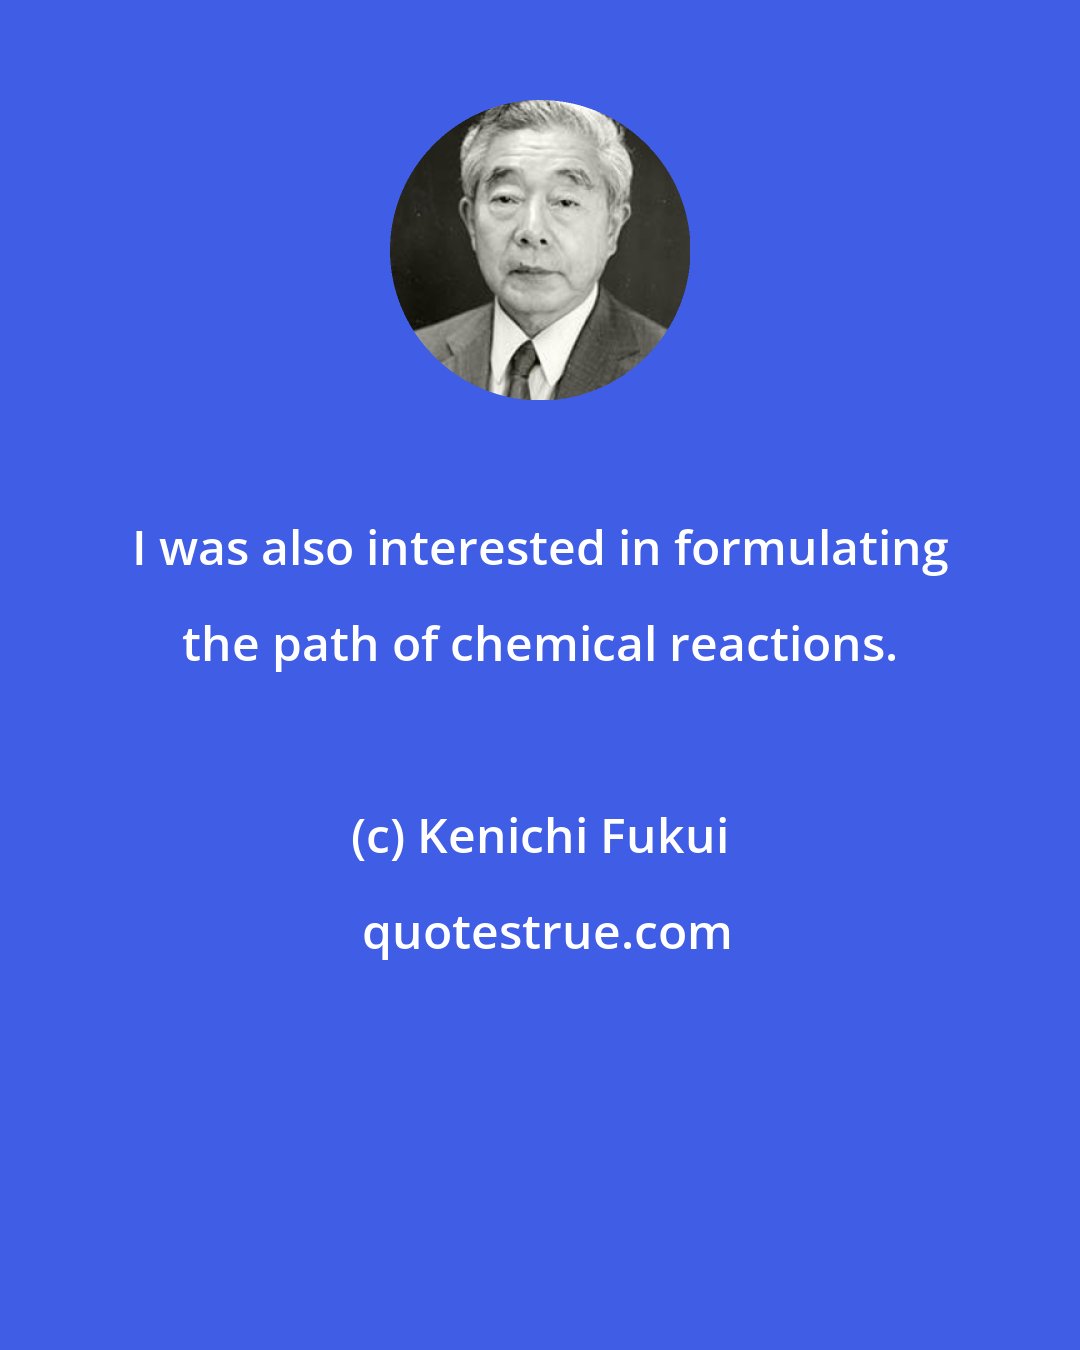 Kenichi Fukui: I was also interested in formulating the path of chemical reactions.